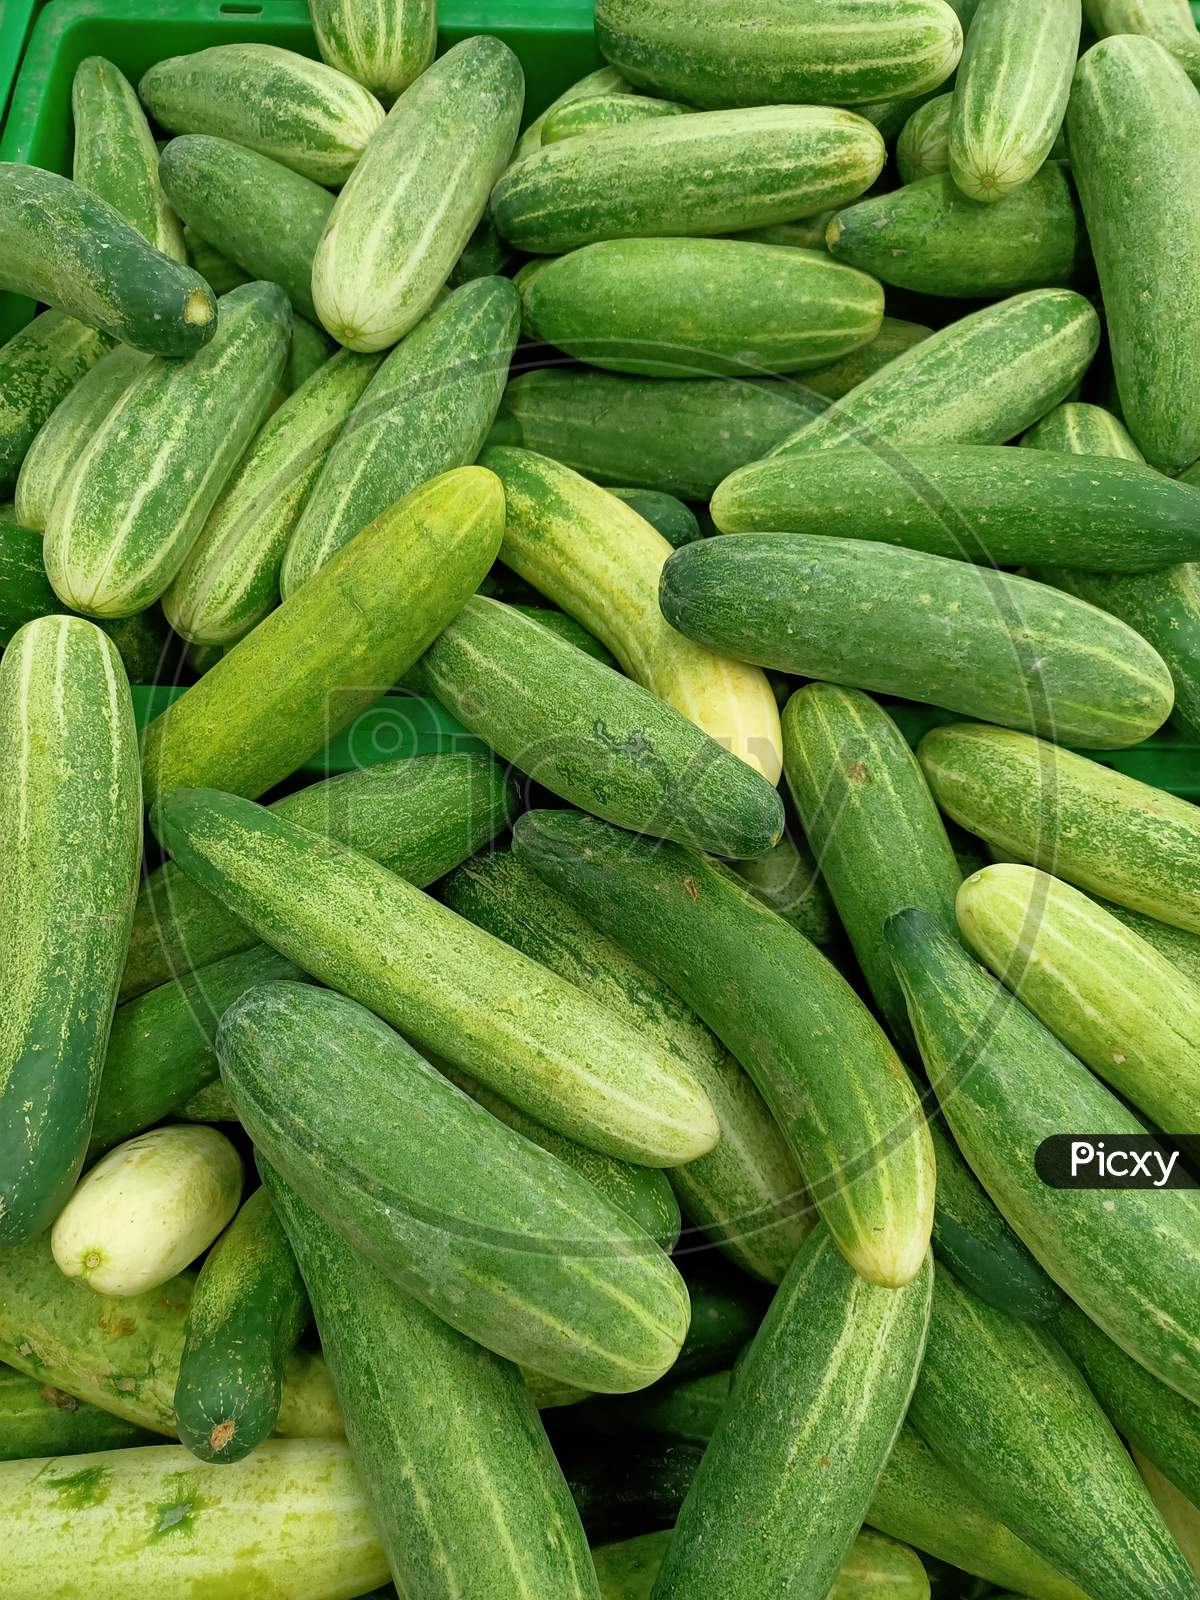 A Native species of Farm fresh Cucumbers used in Indian Cooking grown in an nearby agricultural farm in   Mysuru countryside in Karnataka/India.